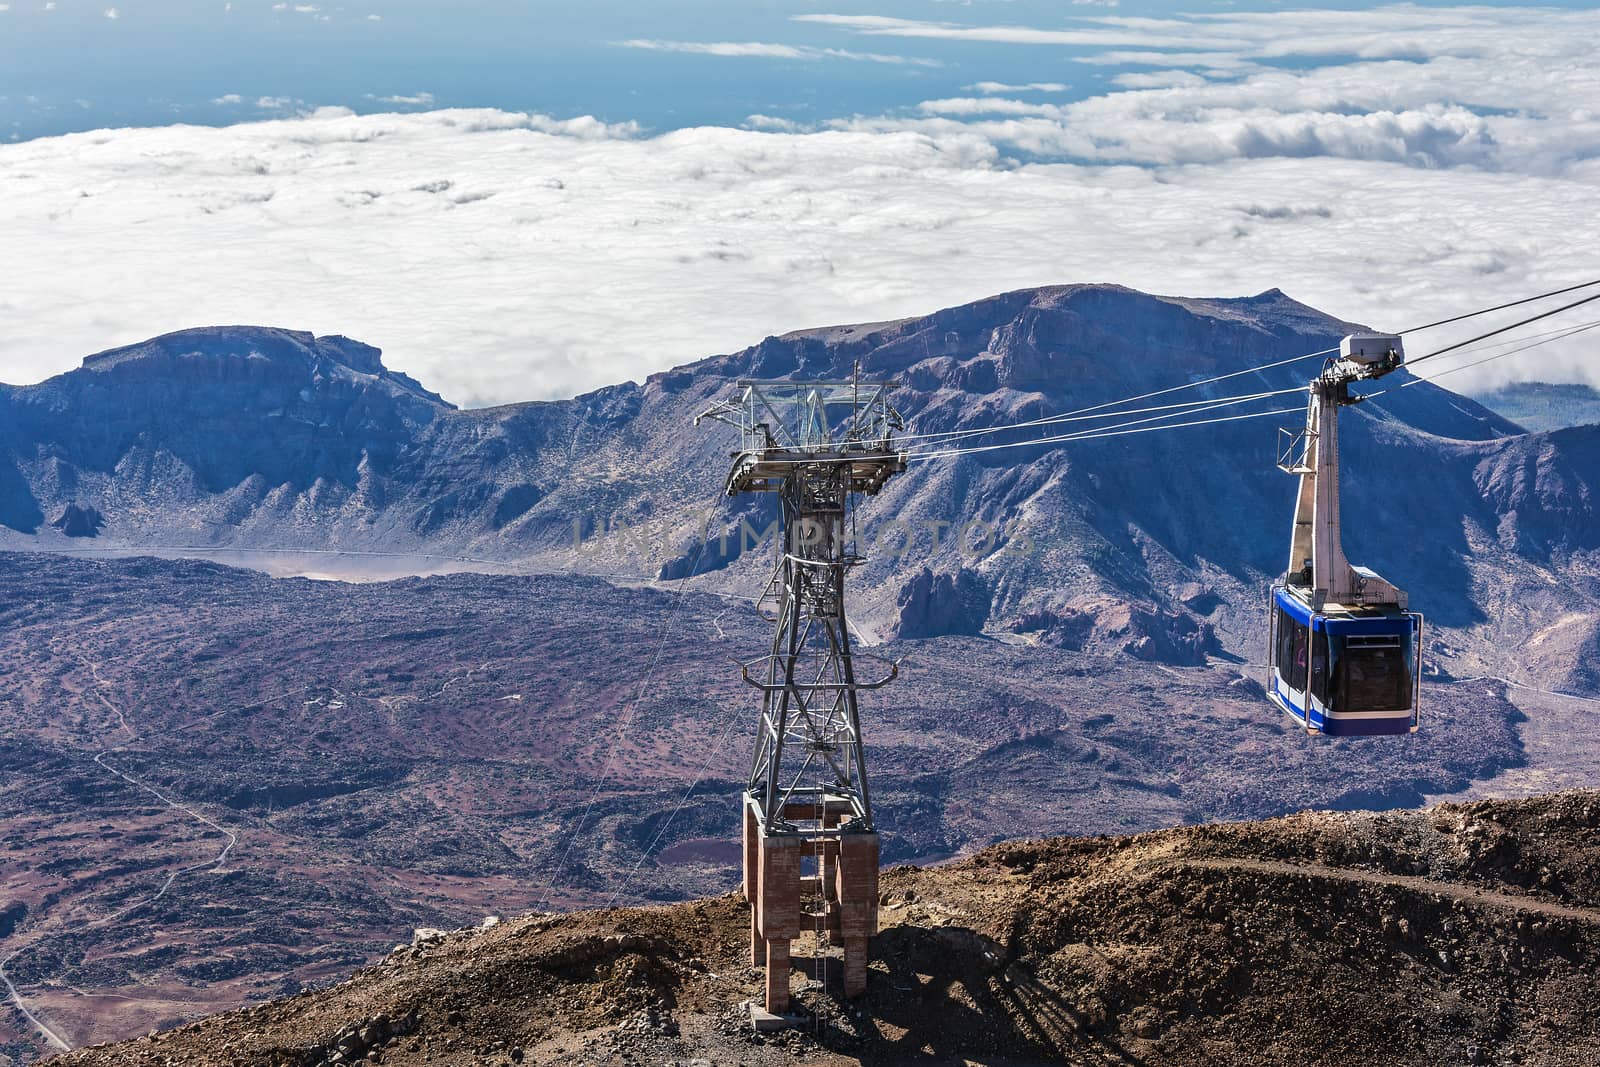 Cabin cableway on the island of Tenerife for the ascent and desc by Grommik